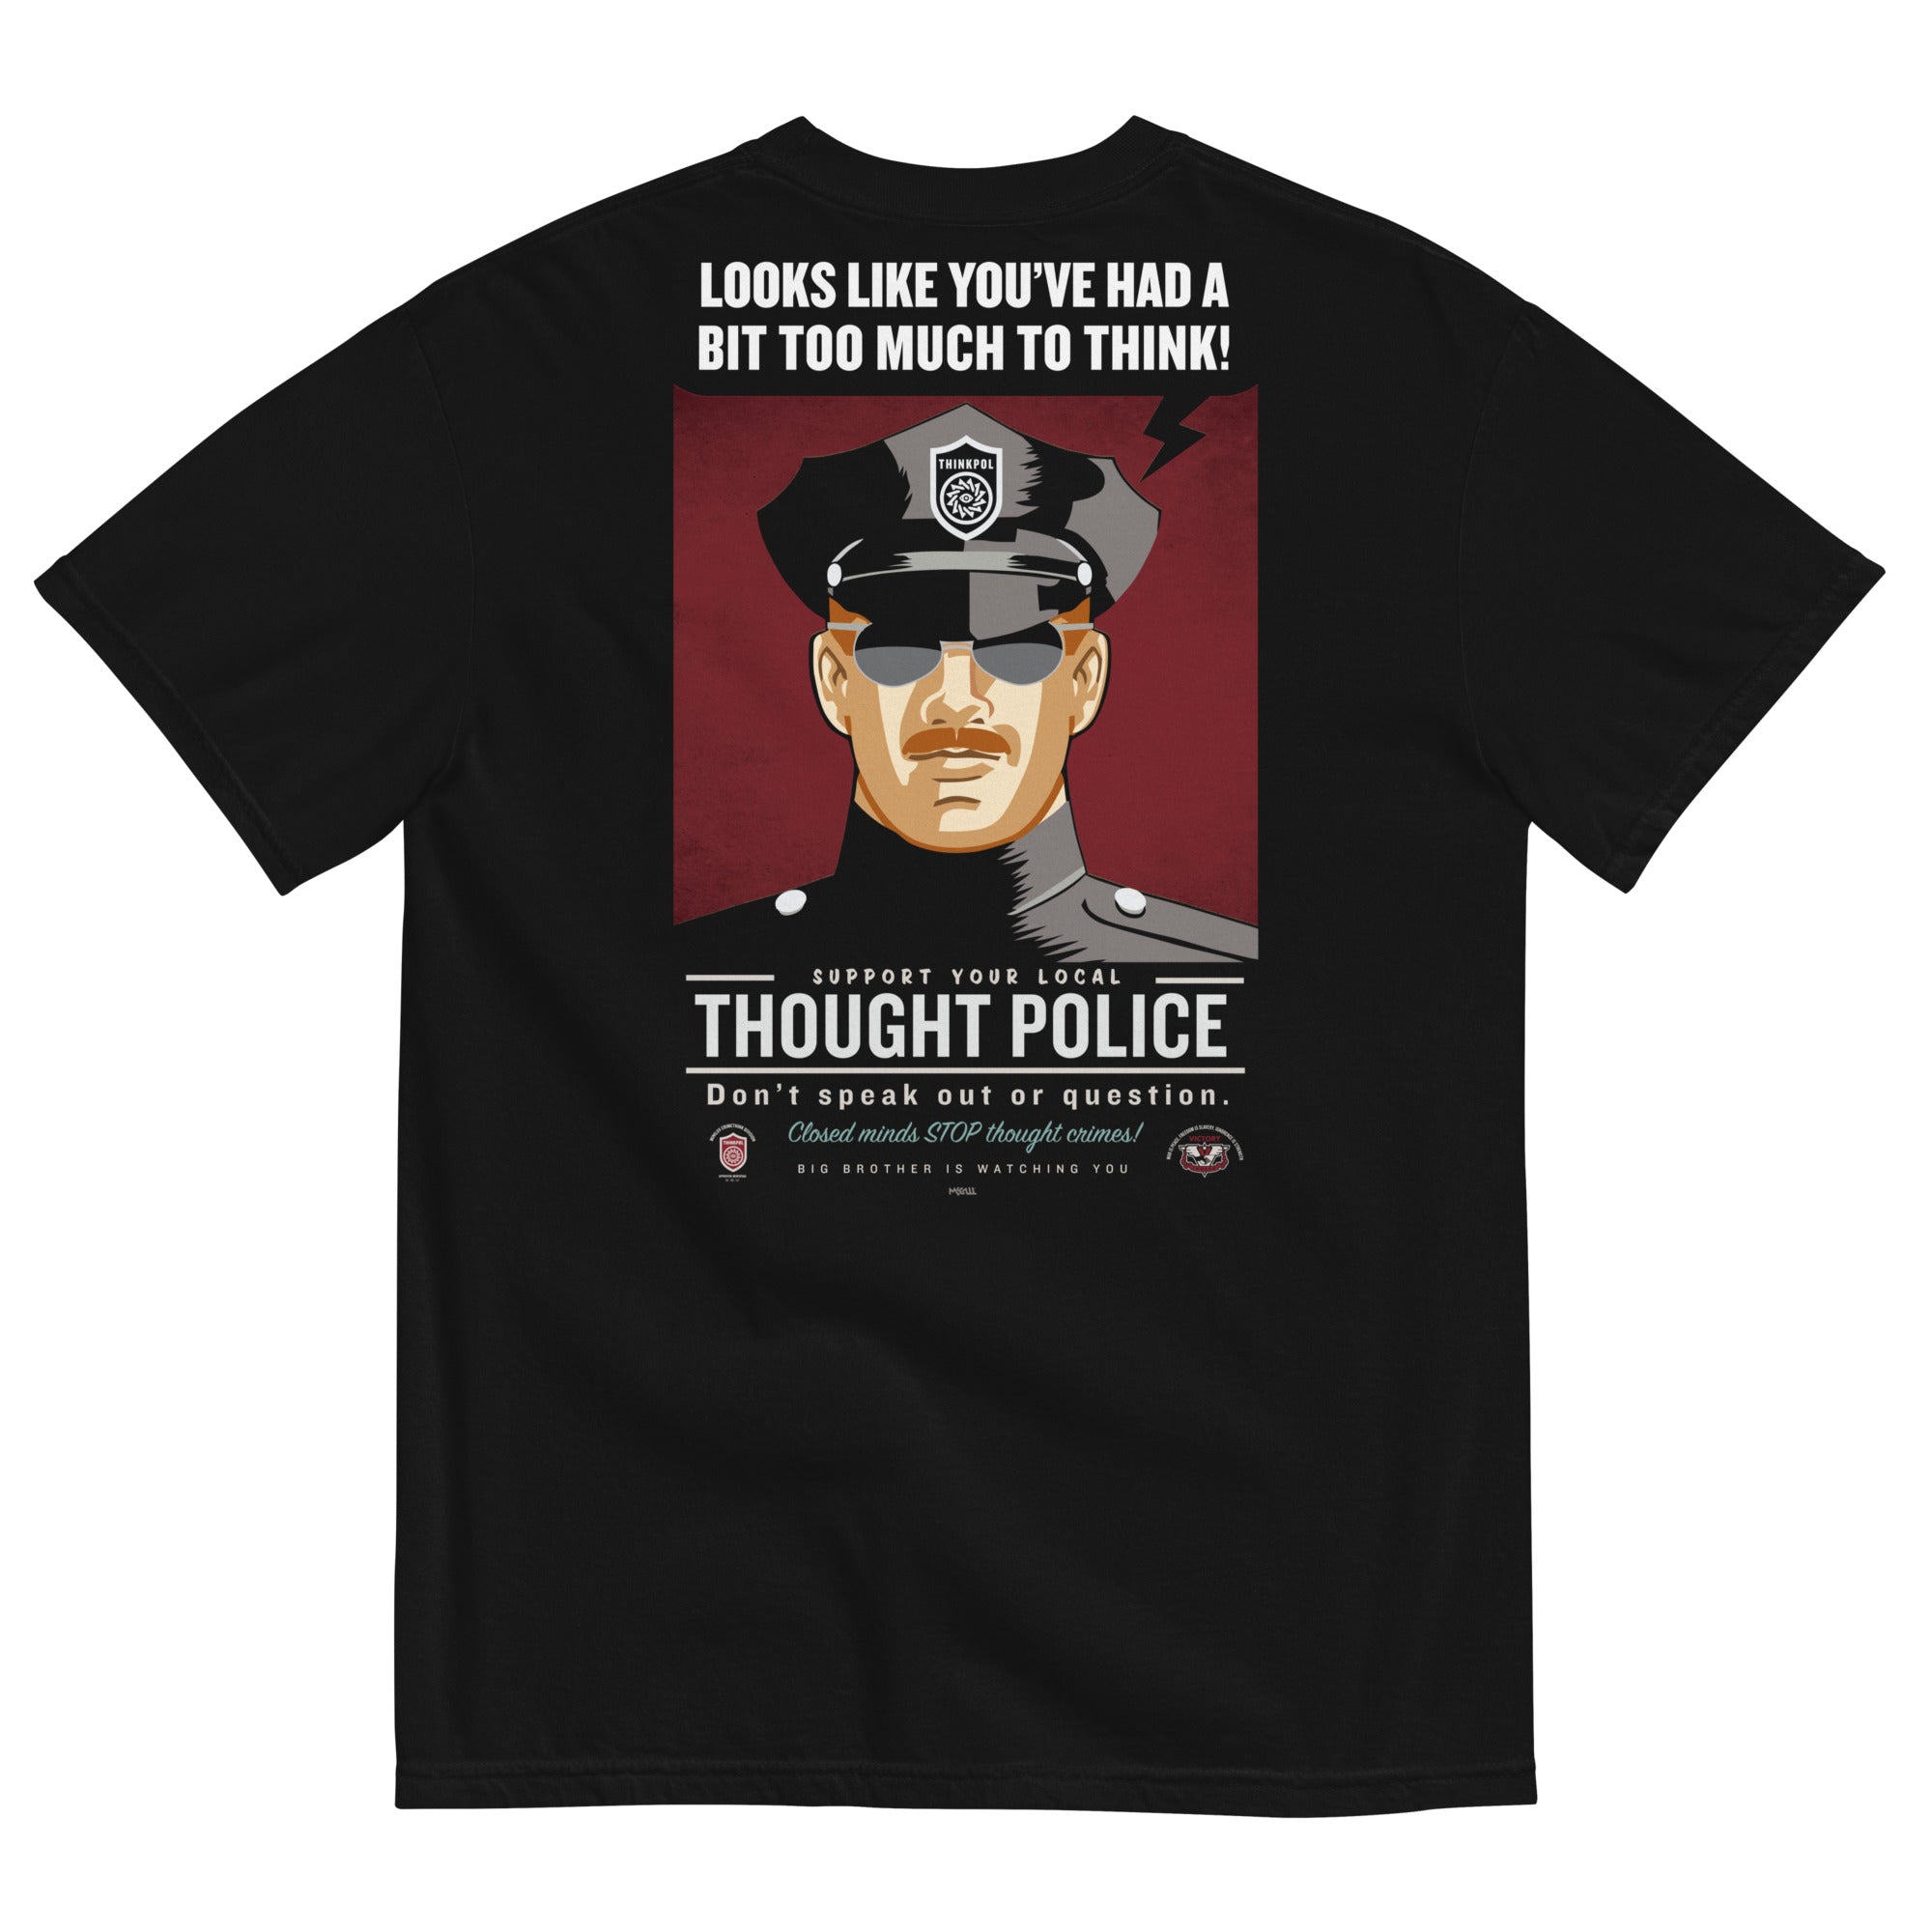 Too Much To Think Men’s Garment-dyed Heavyweight T-shirt